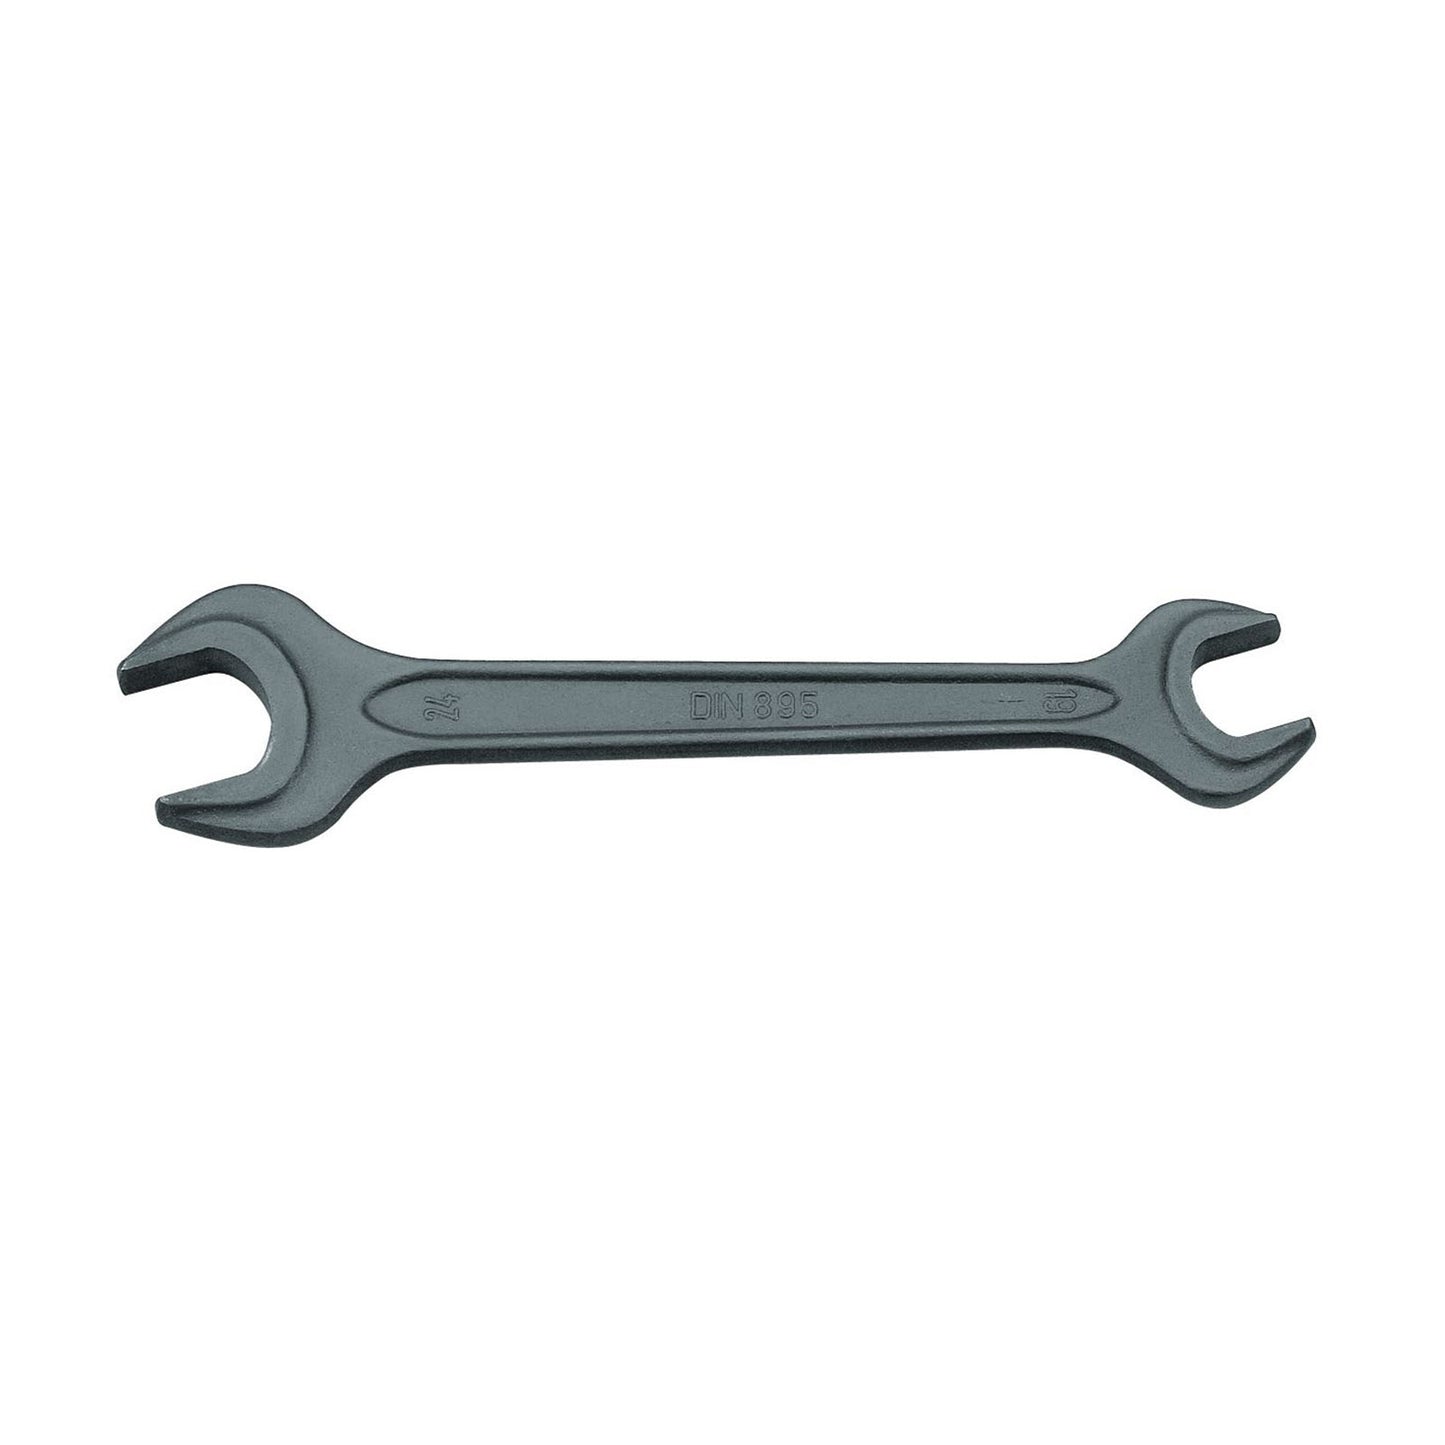 GEDORE 895 10X12 - 2-Mount Fixed Wrench, 10x12 (6584800)